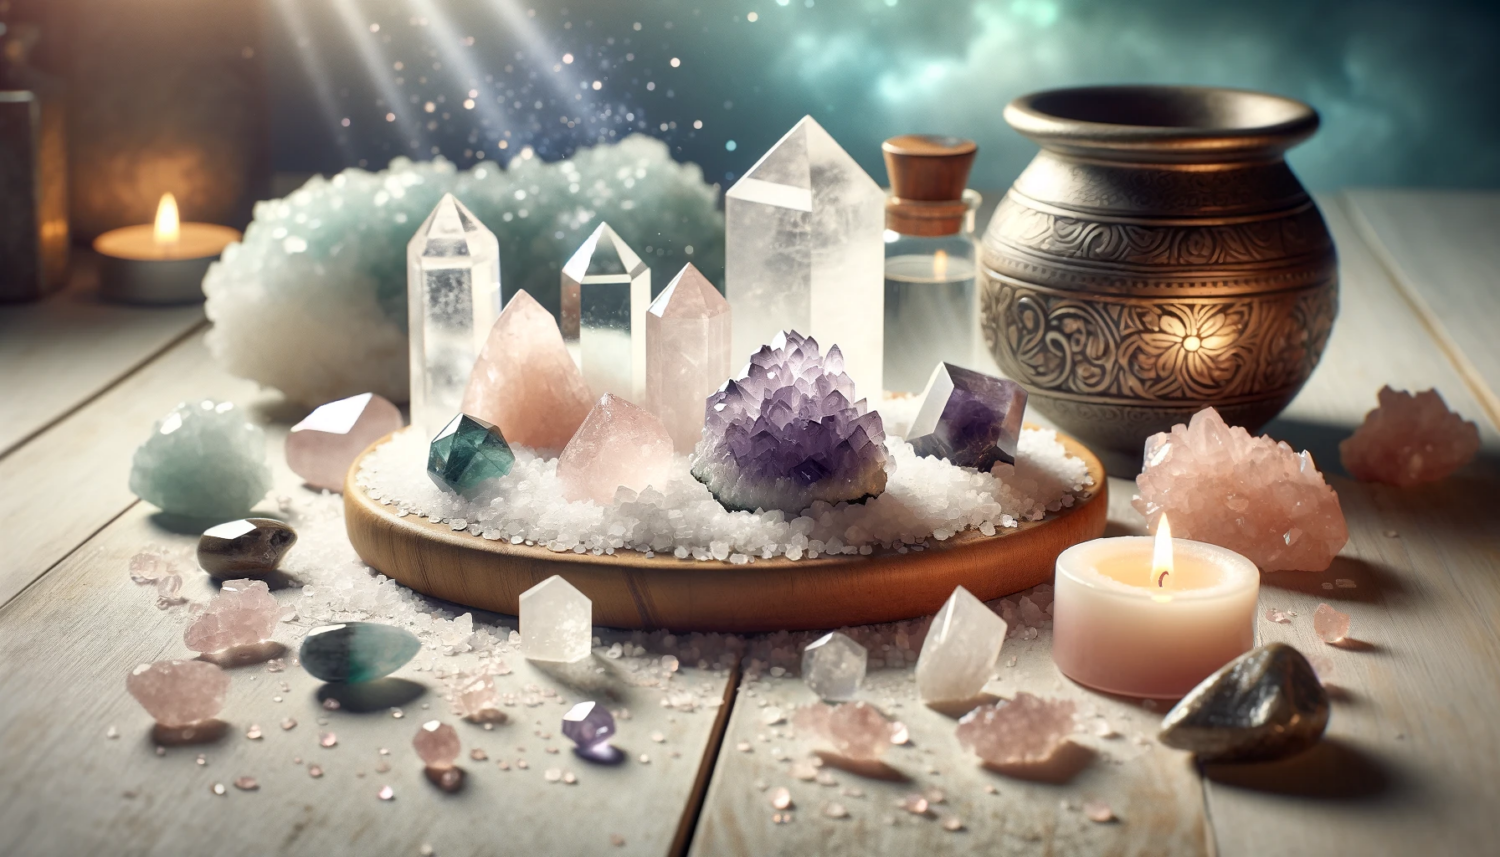 A mystical scene depicting various types of crystals undergoing a salt cleansing ritual, set in a metaphysical atmosphere. The scene includes crystals such as clear quartz, amethyst, and rose quartz, each radiating a soft, subtle glow. These crystals are carefully placed on a layer of glistening white salt, scattered across a smooth, pale wooden surface. The background is filled with a soft, diffused light, creating a serene and otherworldly ambiance. The composition uses a palette of soft pastels and light tones to evoke a sense of tranquility and mysticism, perfect for a 16:9 aspect ratio.